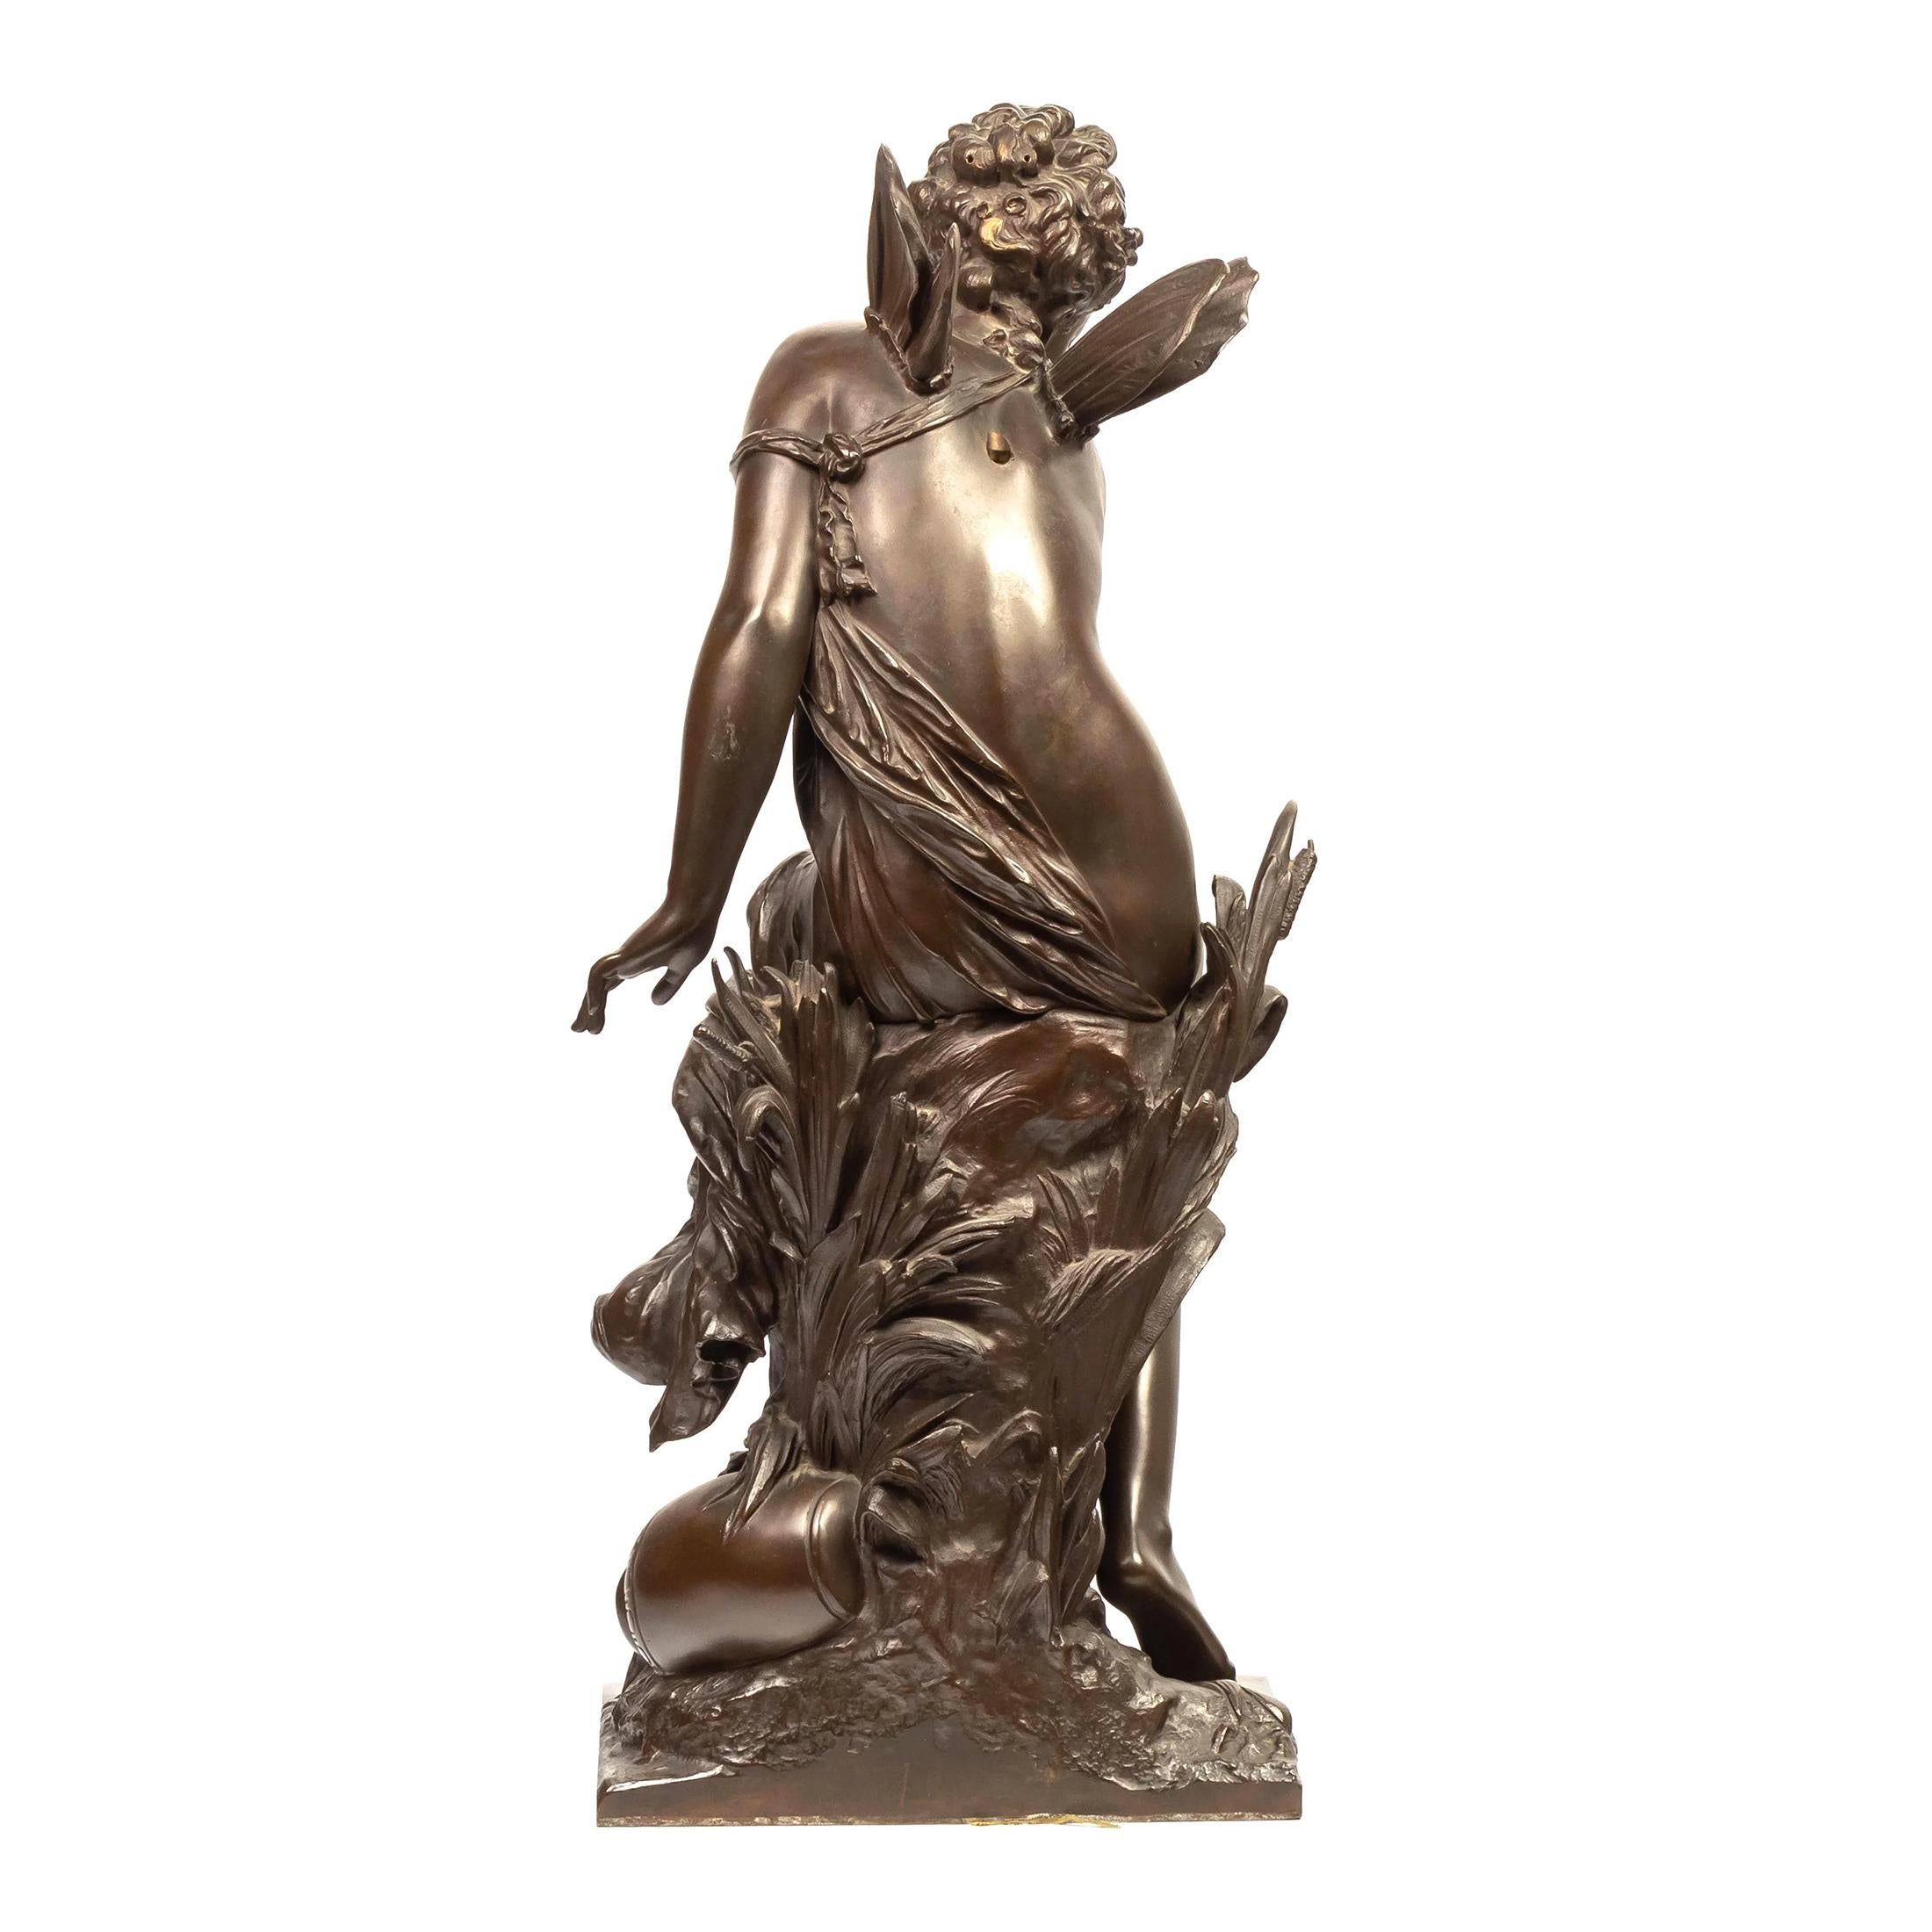 MATHURIN MOREAU
French, (1822-1912)

‘La Libellule’
signed ‘Moreau Mathurin’  
27 1/2 in. 11 1/2 in. x 15 in.


Notes: A fine quality Art Nouveau allegorical bronze sculpture depicting a seated fairy displaying small wings. Titled 